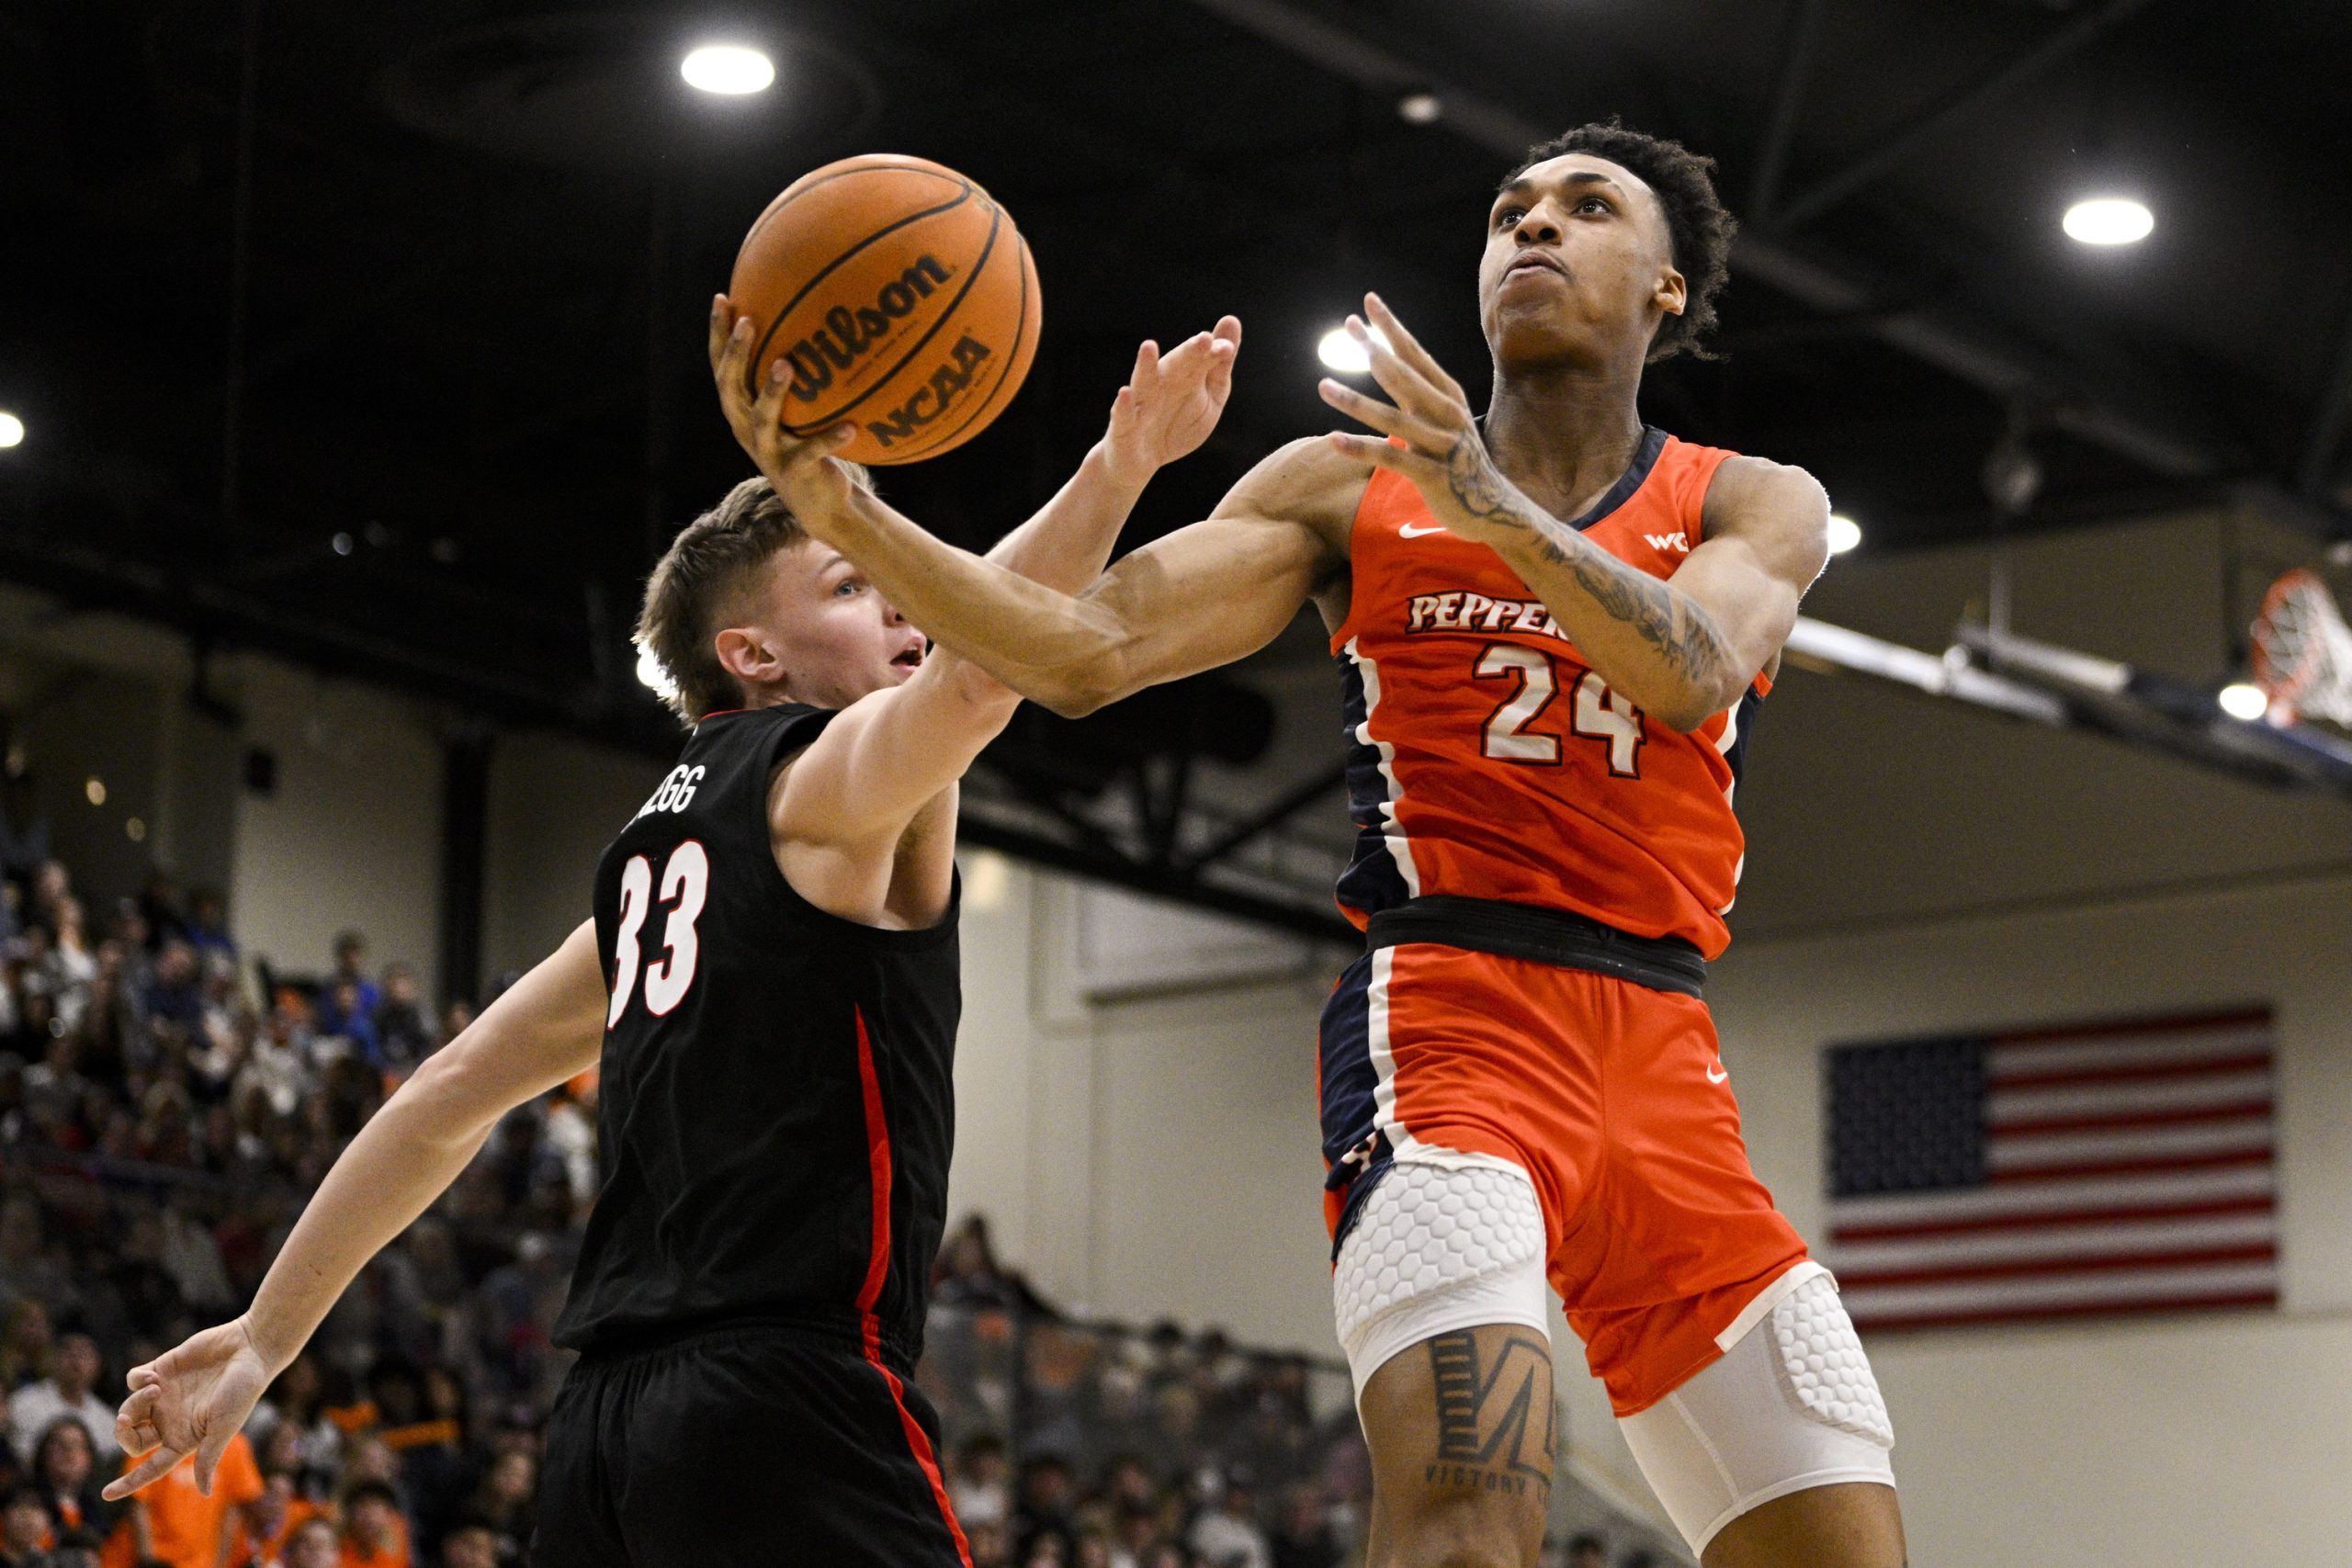 Feb 18, 2023; Malibu, California, USA; Pepperdine Waves forward Maxwell Lewis (24) goes up for a basket against Gonzaga Bulldogs guard Malachi Smith (13) during the first half at Firestone Fieldhouse. Mandatory Credit: Kelvin Kuo-USA TODAY Sports